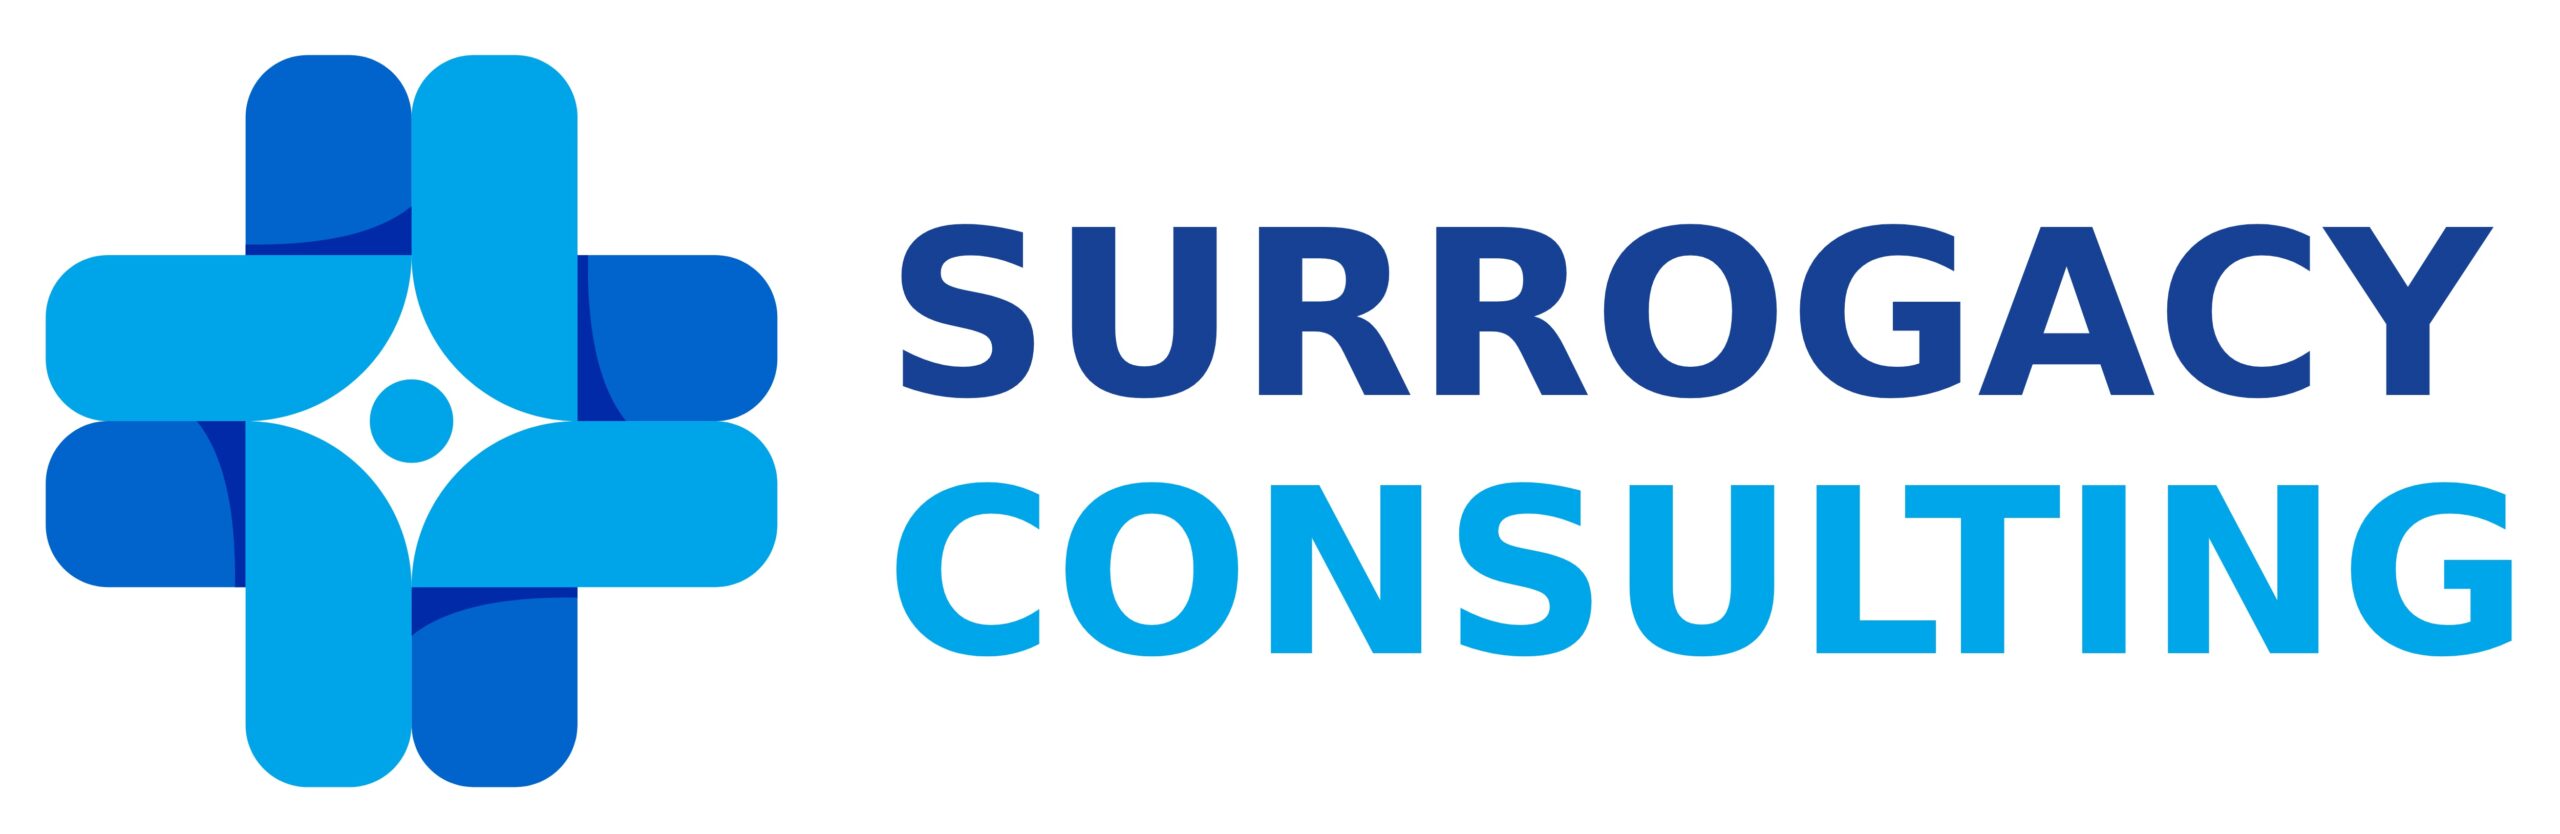 Global Surrogacy Consulting